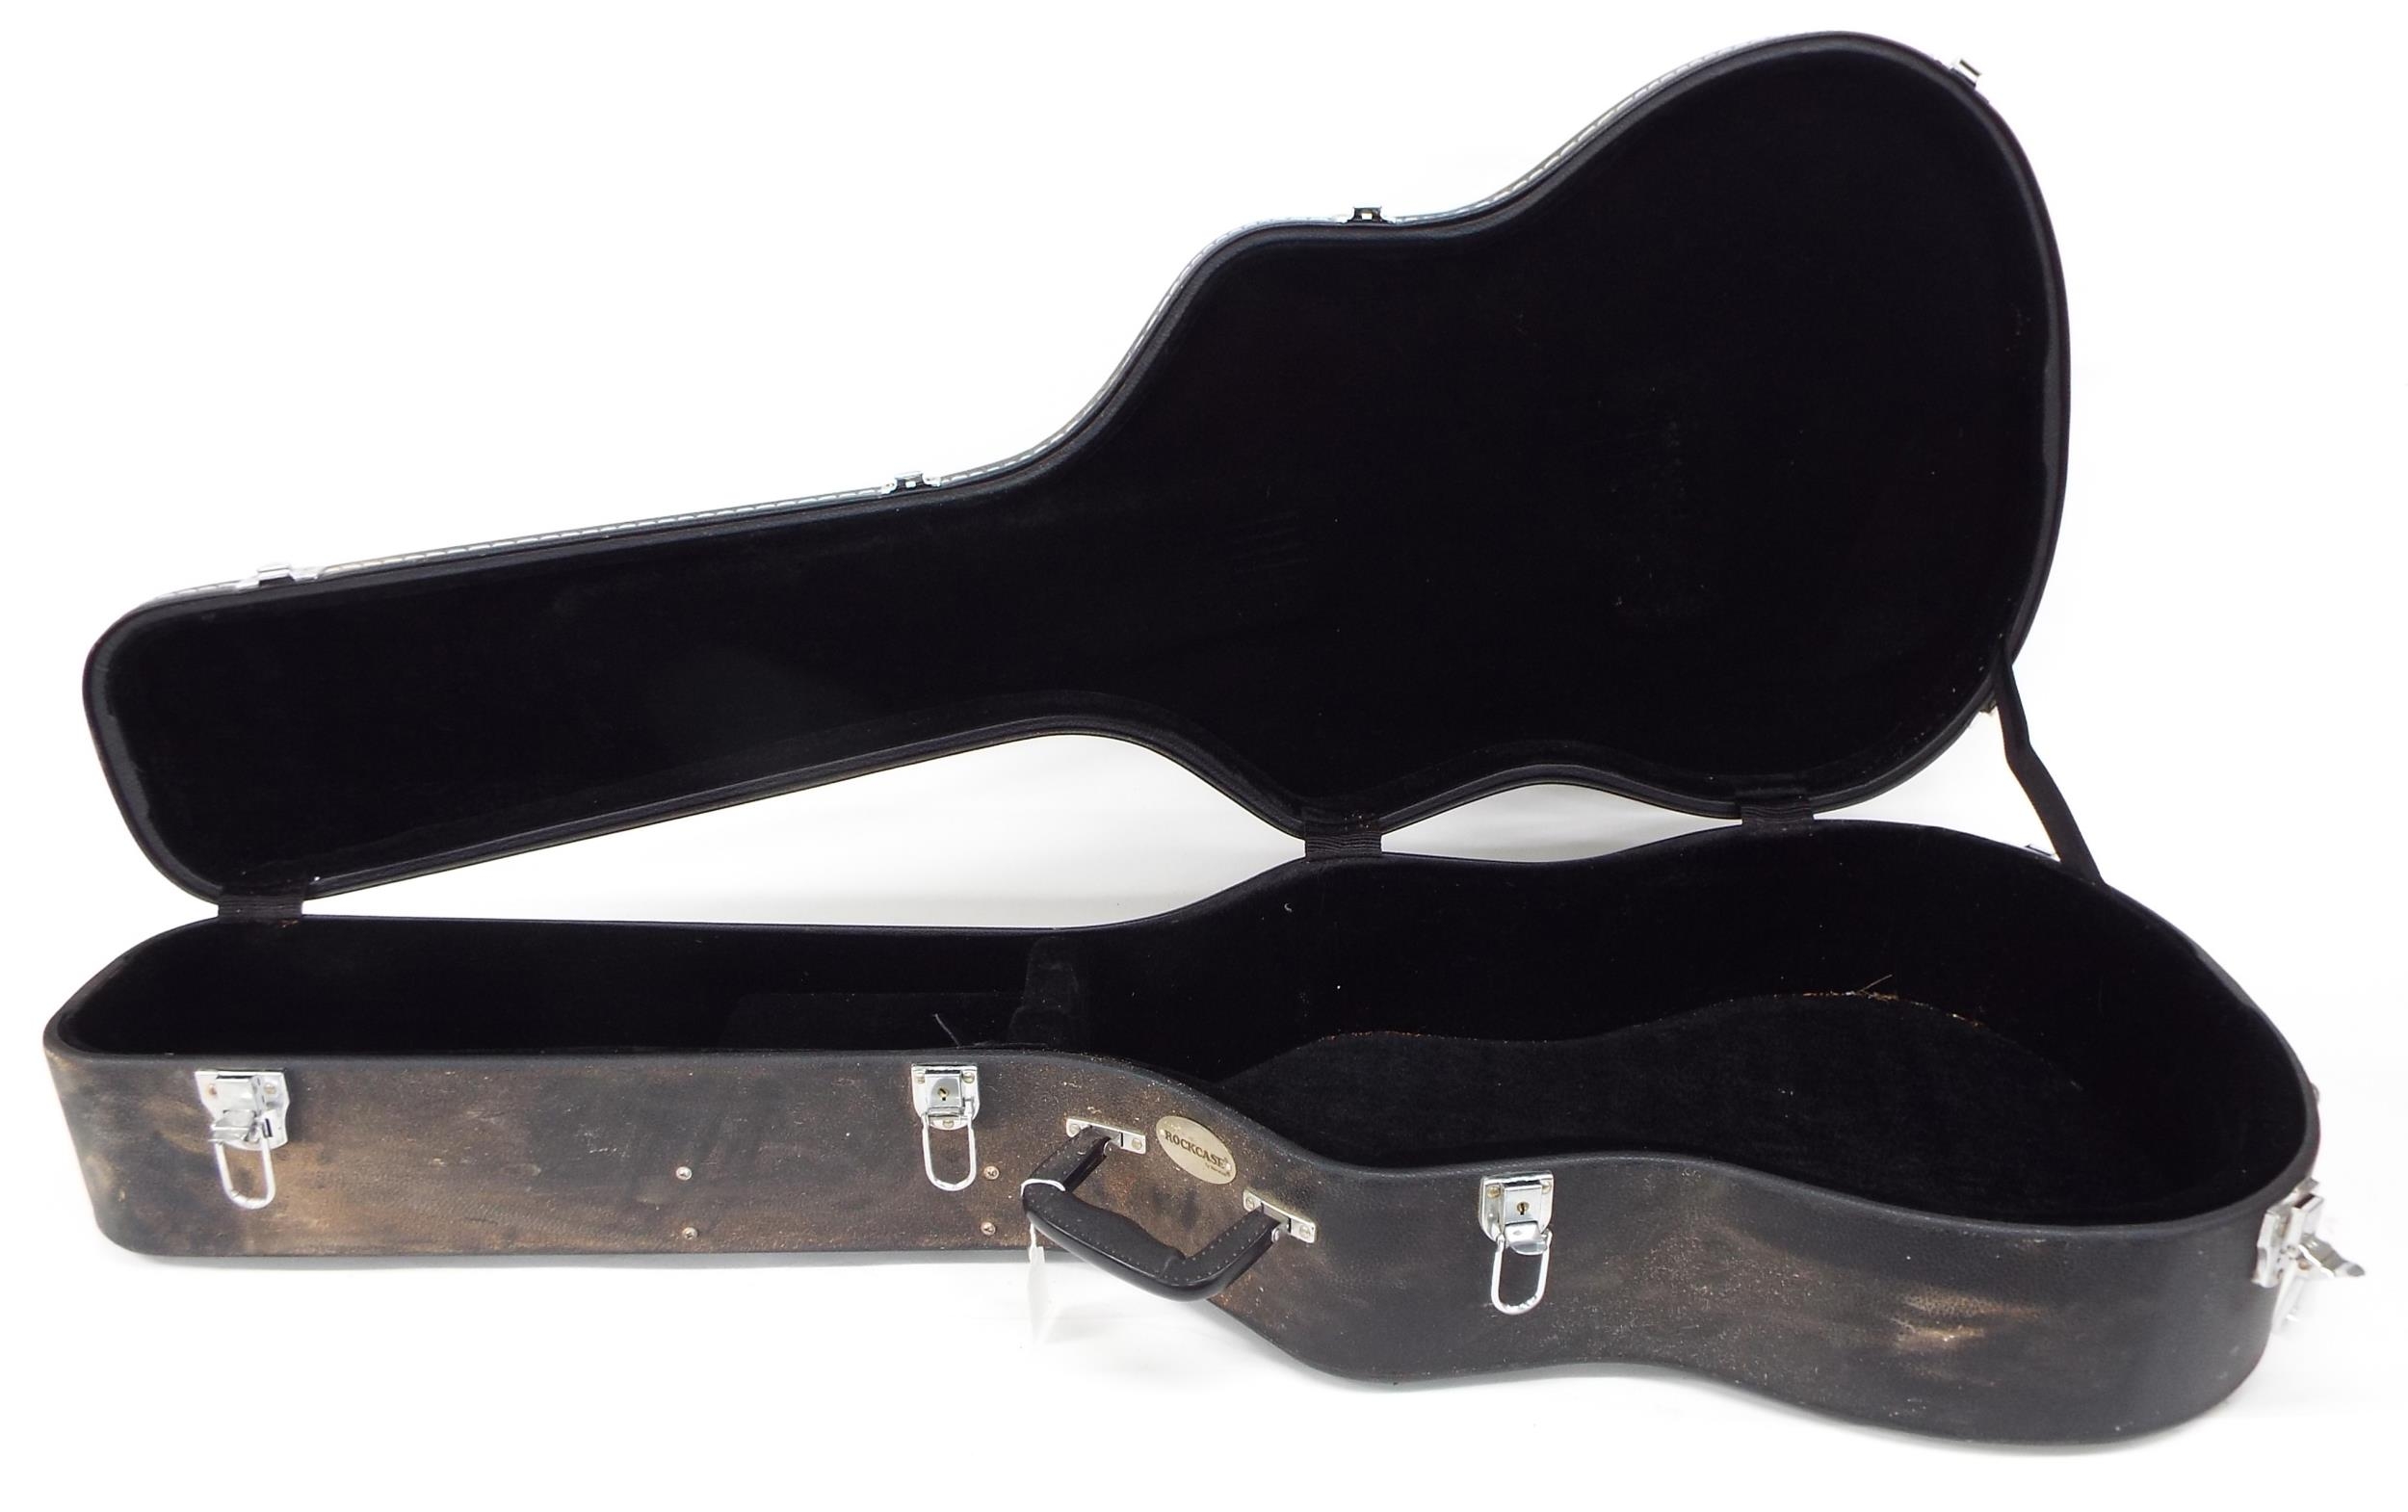 Rockcase acoustic guitar hard case suitable for a 16" lower bout guitar